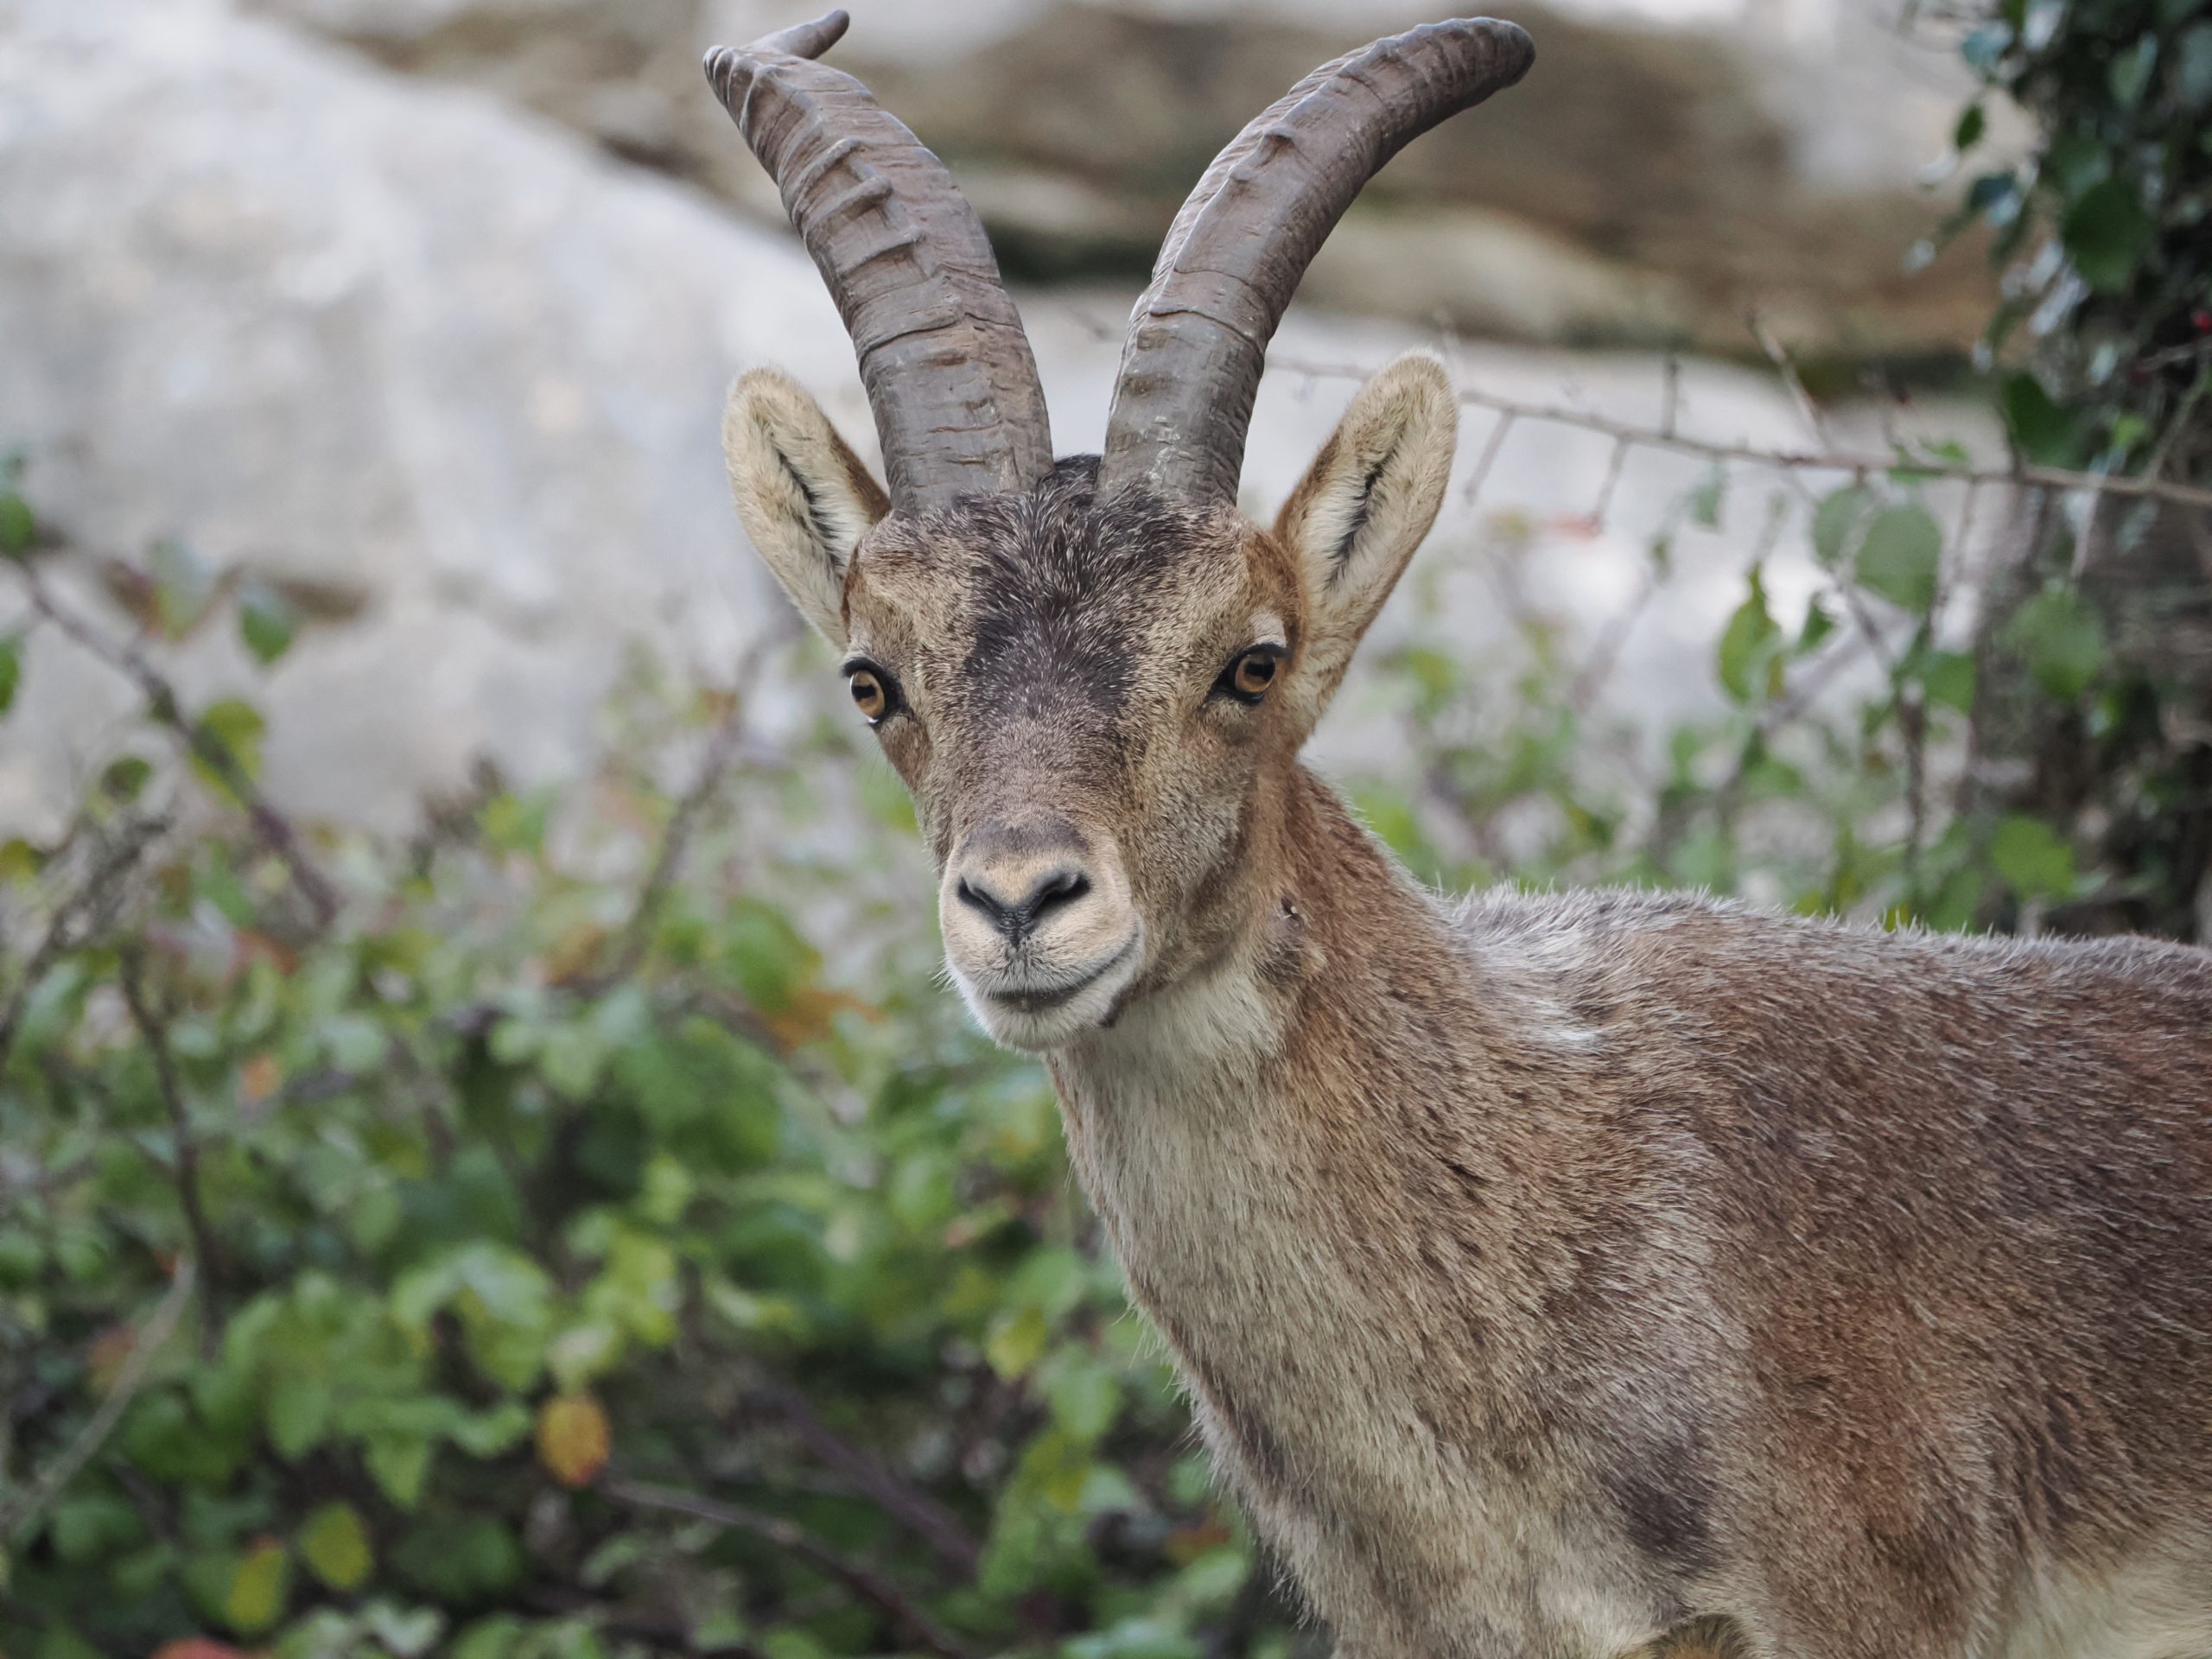 Grazalema Natural Park is famous for its biodiversity